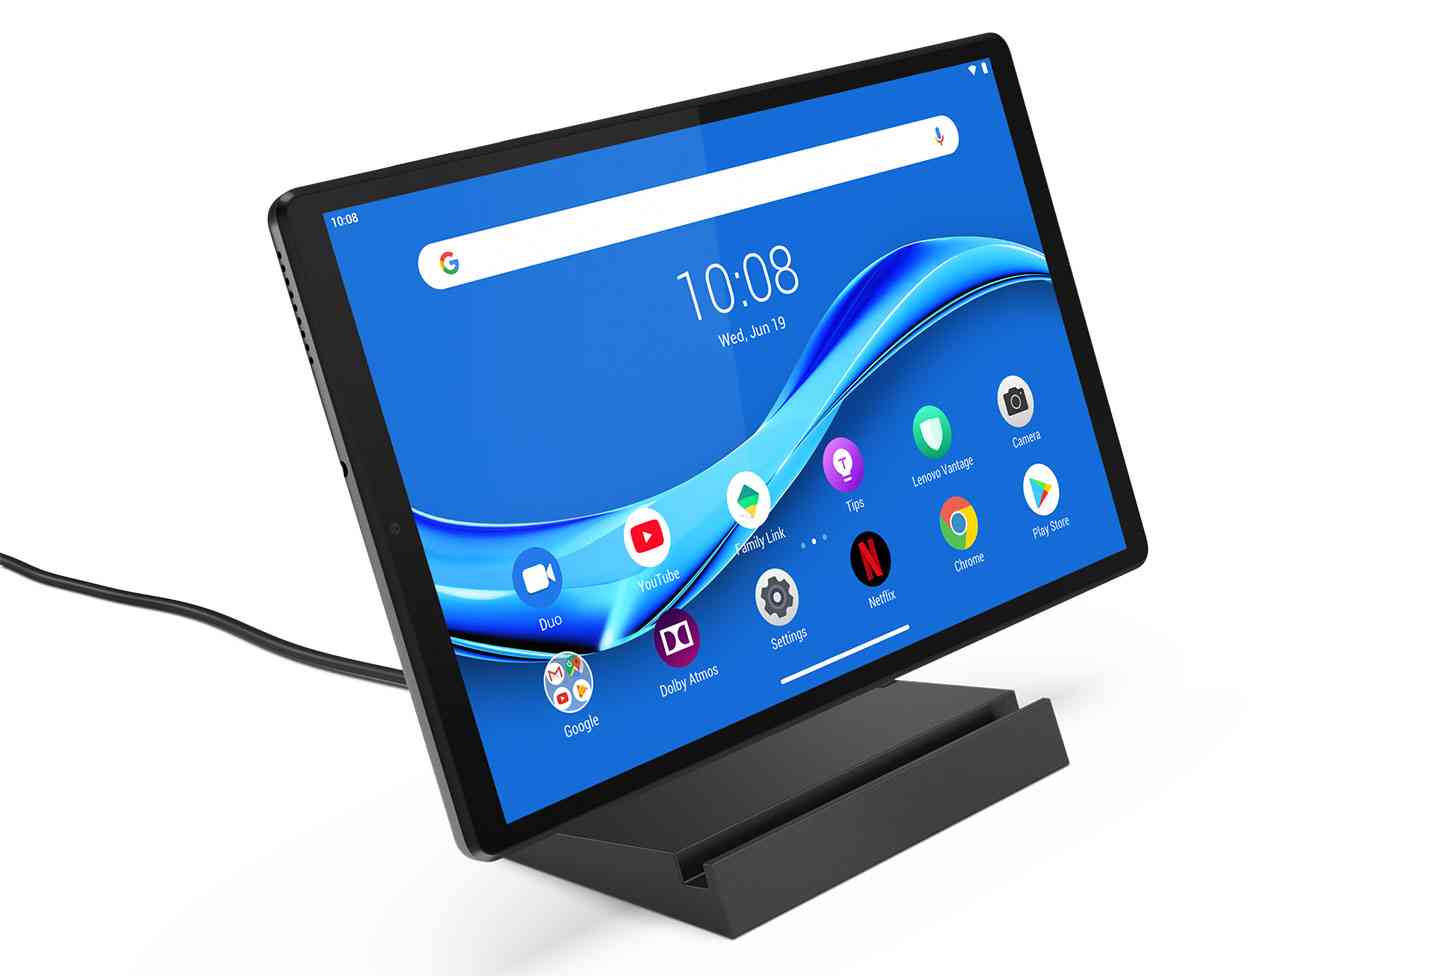 Lenovo intros new 10-inch Android tablet with Ambient Mode